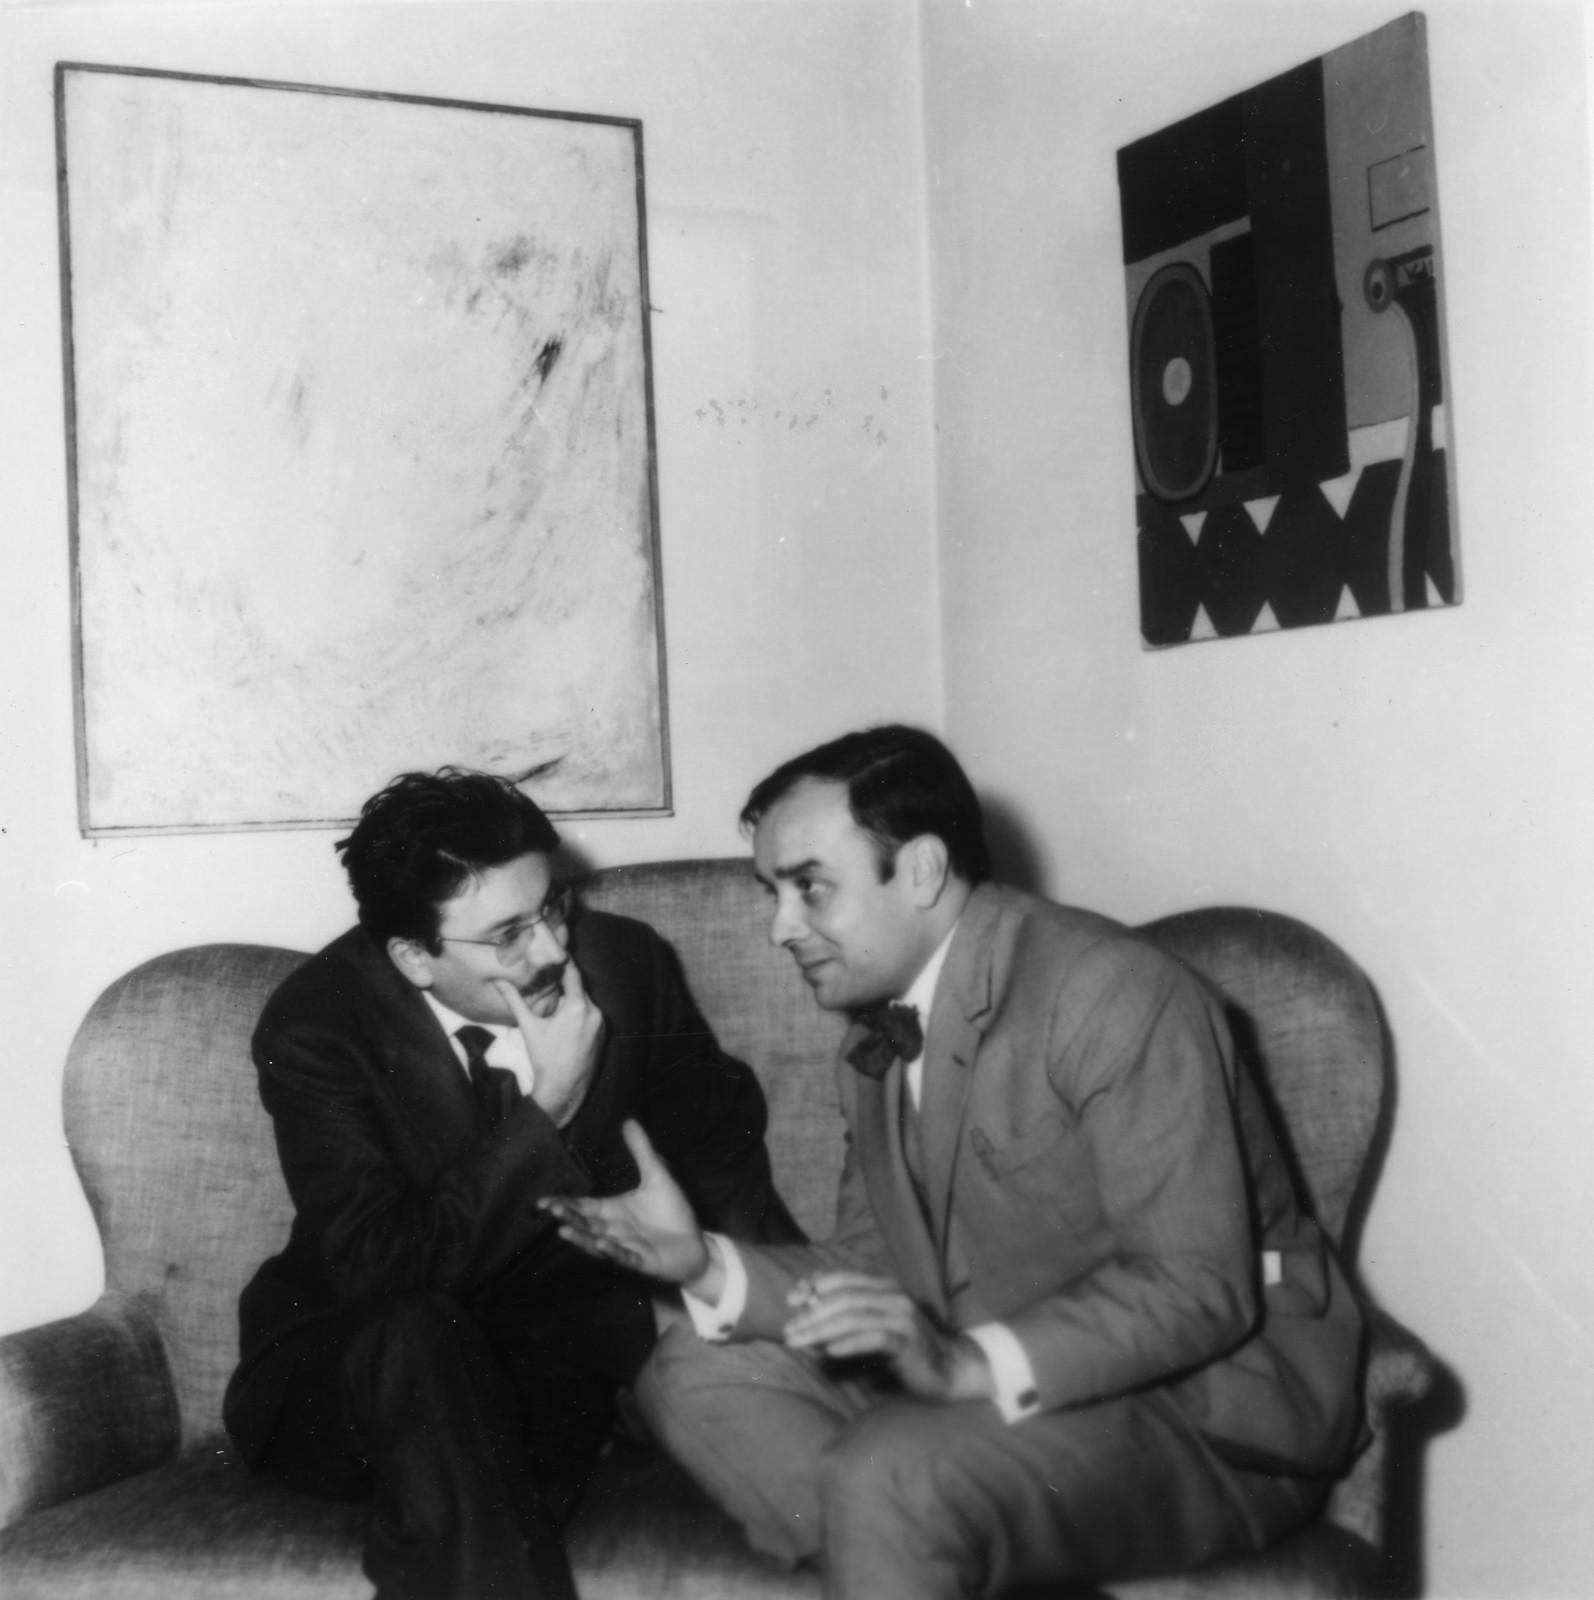 Pierre Restany and Yves Klein during the opening of the exhibition "Yves Klein le monochrome: il nuovo realismo del colore", Apollinaire Gallery, Milano, 1961